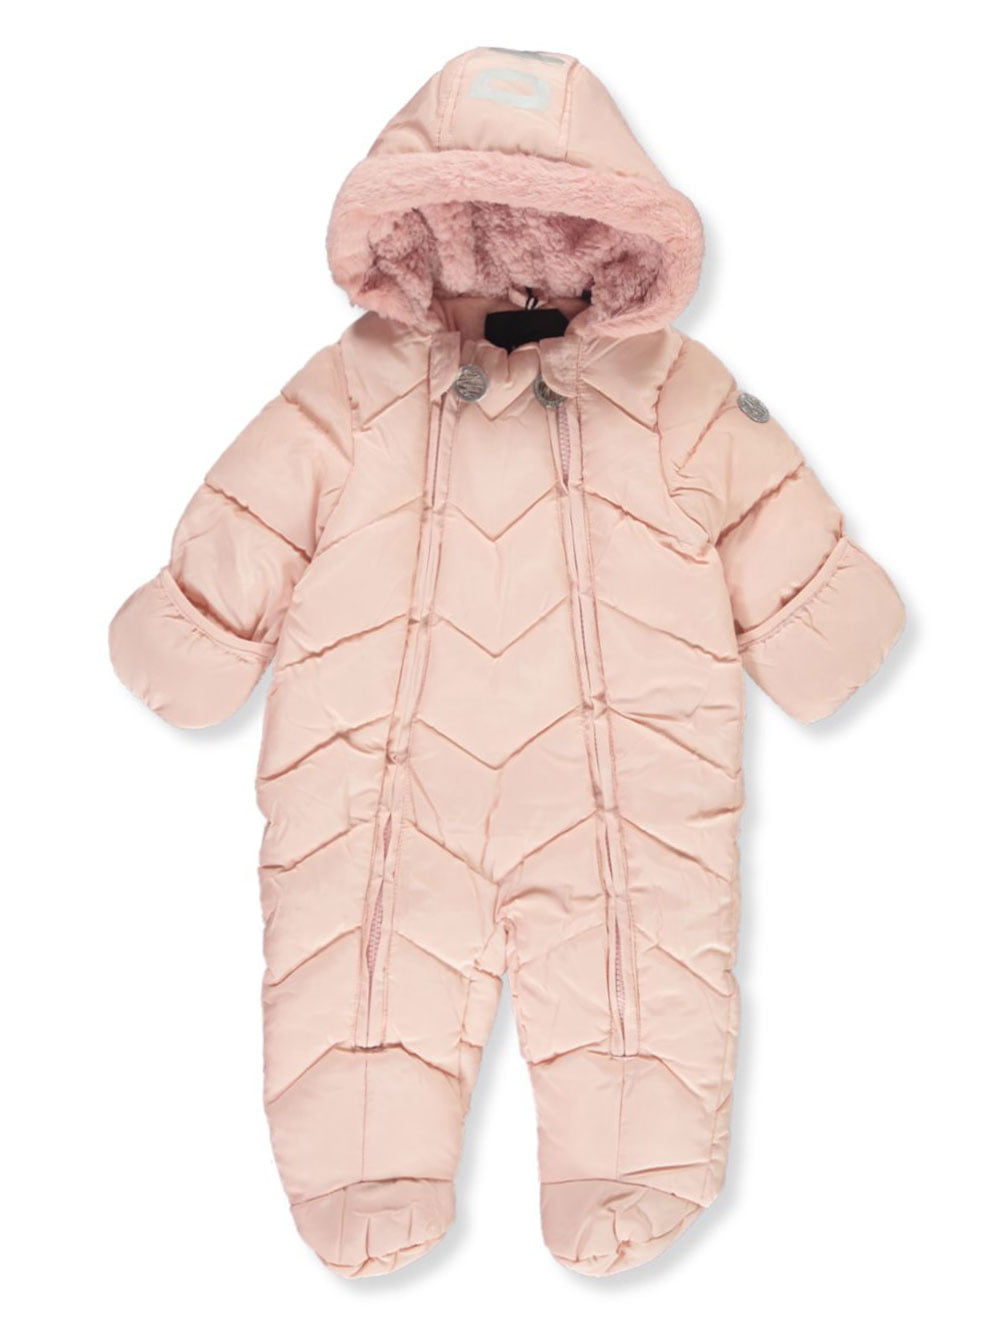 Baby Girls Pramsuit Snowsuit Winter Coat Warm Hooded Fully Lined Pink Spot NEW 